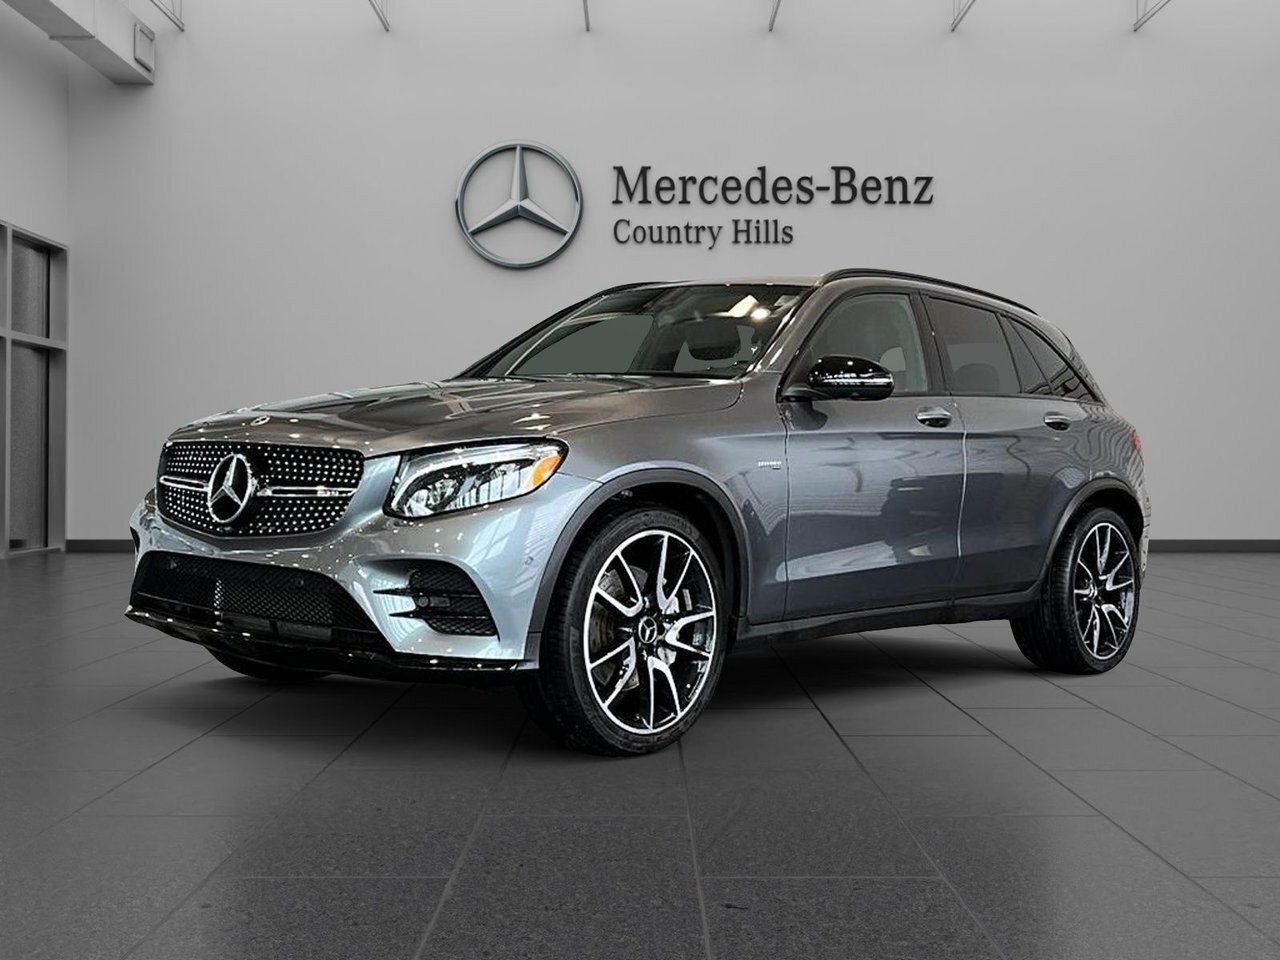 2019 Mercedes-Benz AMG GLC 43 4MATIC SUV Low km's! Amazing condition!